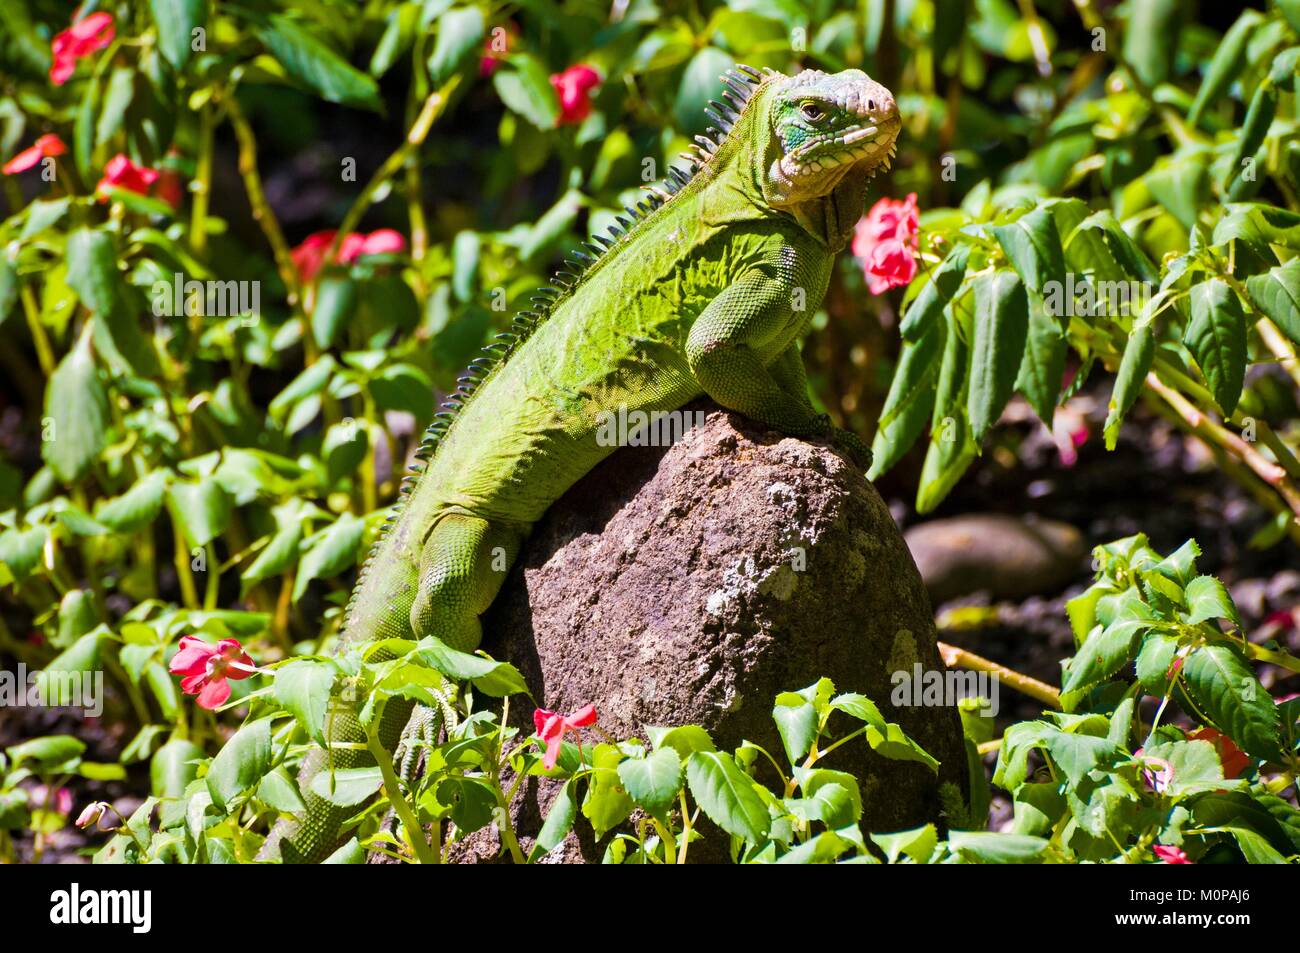 France,Caribbean,French West Indies,Guadeloupe,Basse-Terre,Parc des Mamelles,green iguana or common iguana (Iguana iguana) basking in the sun Stock Photo